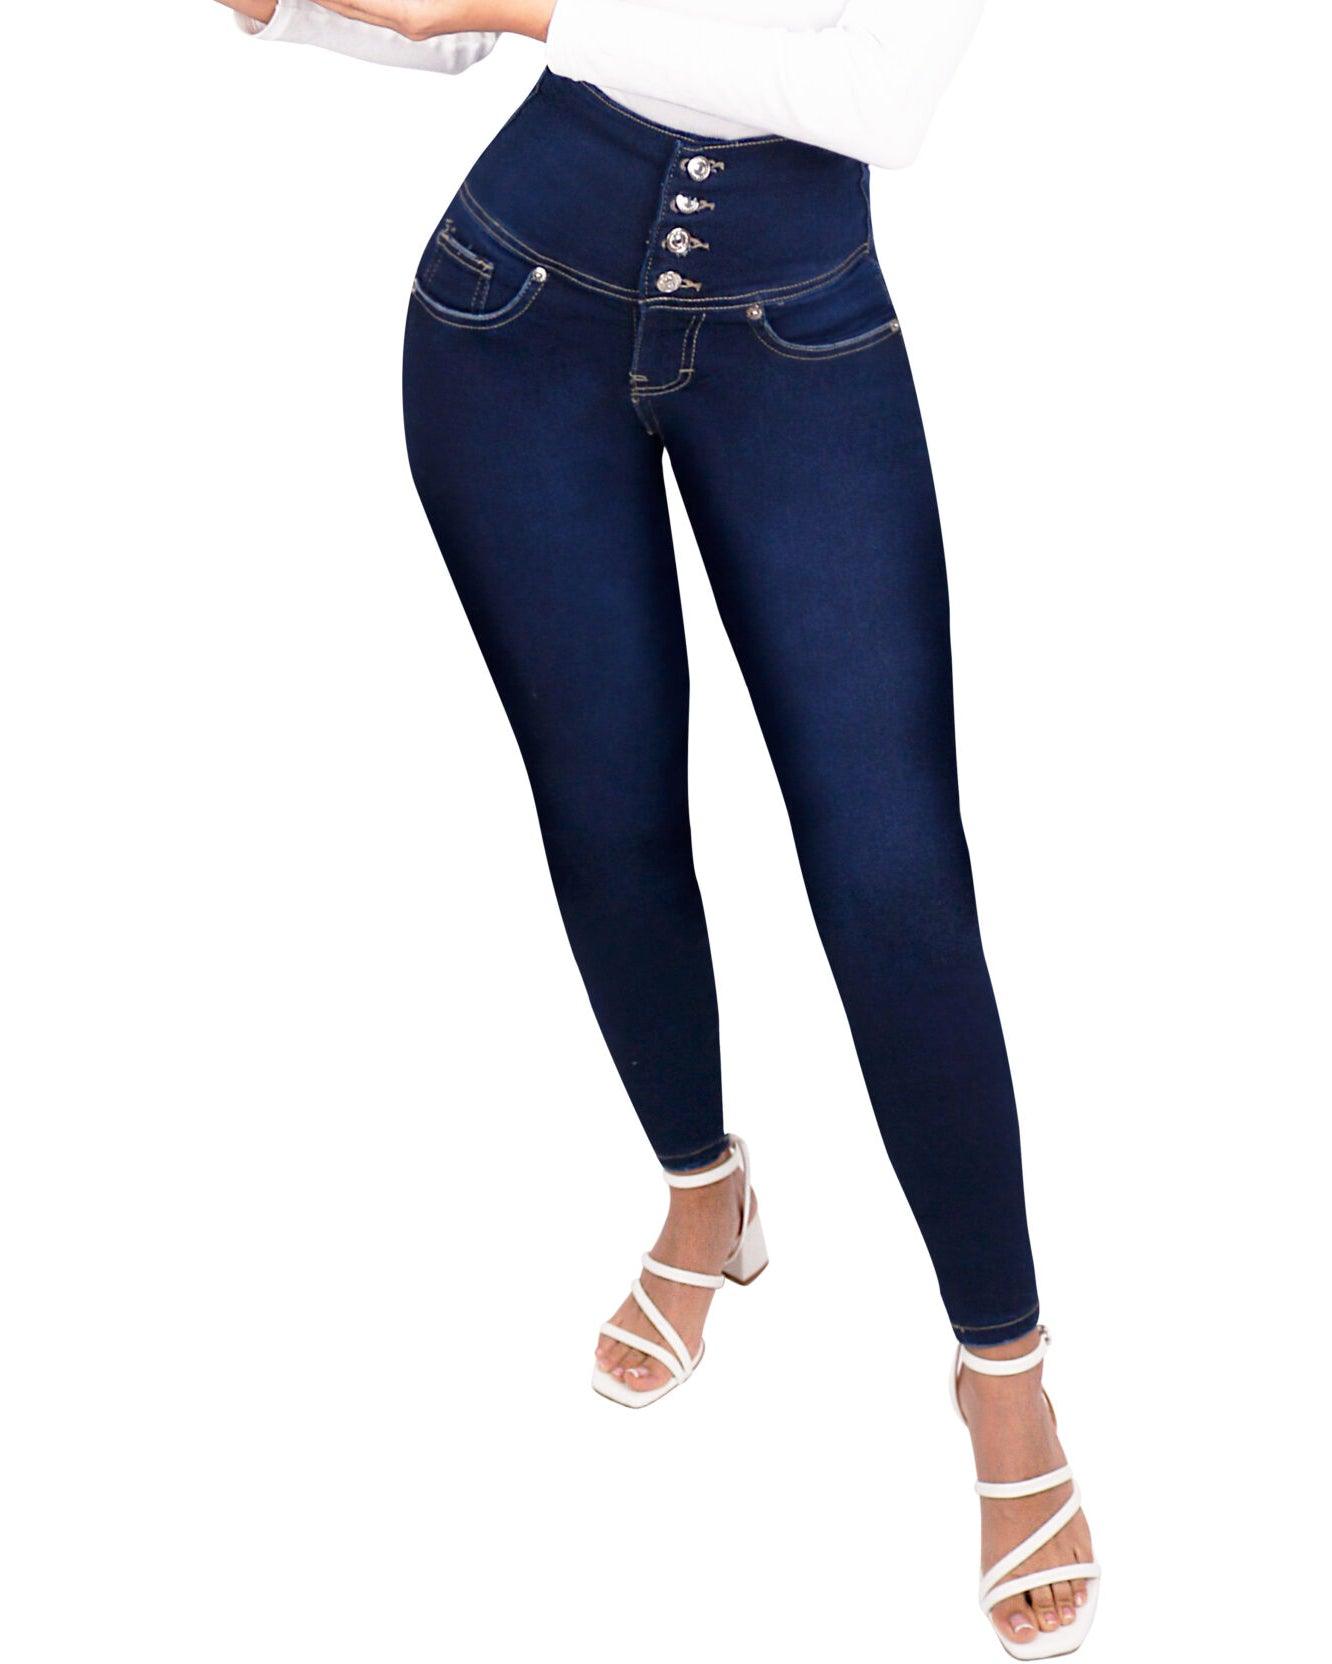 Jeans Stretchy High Curvy Butt Waist Jeans Wishe Lifting